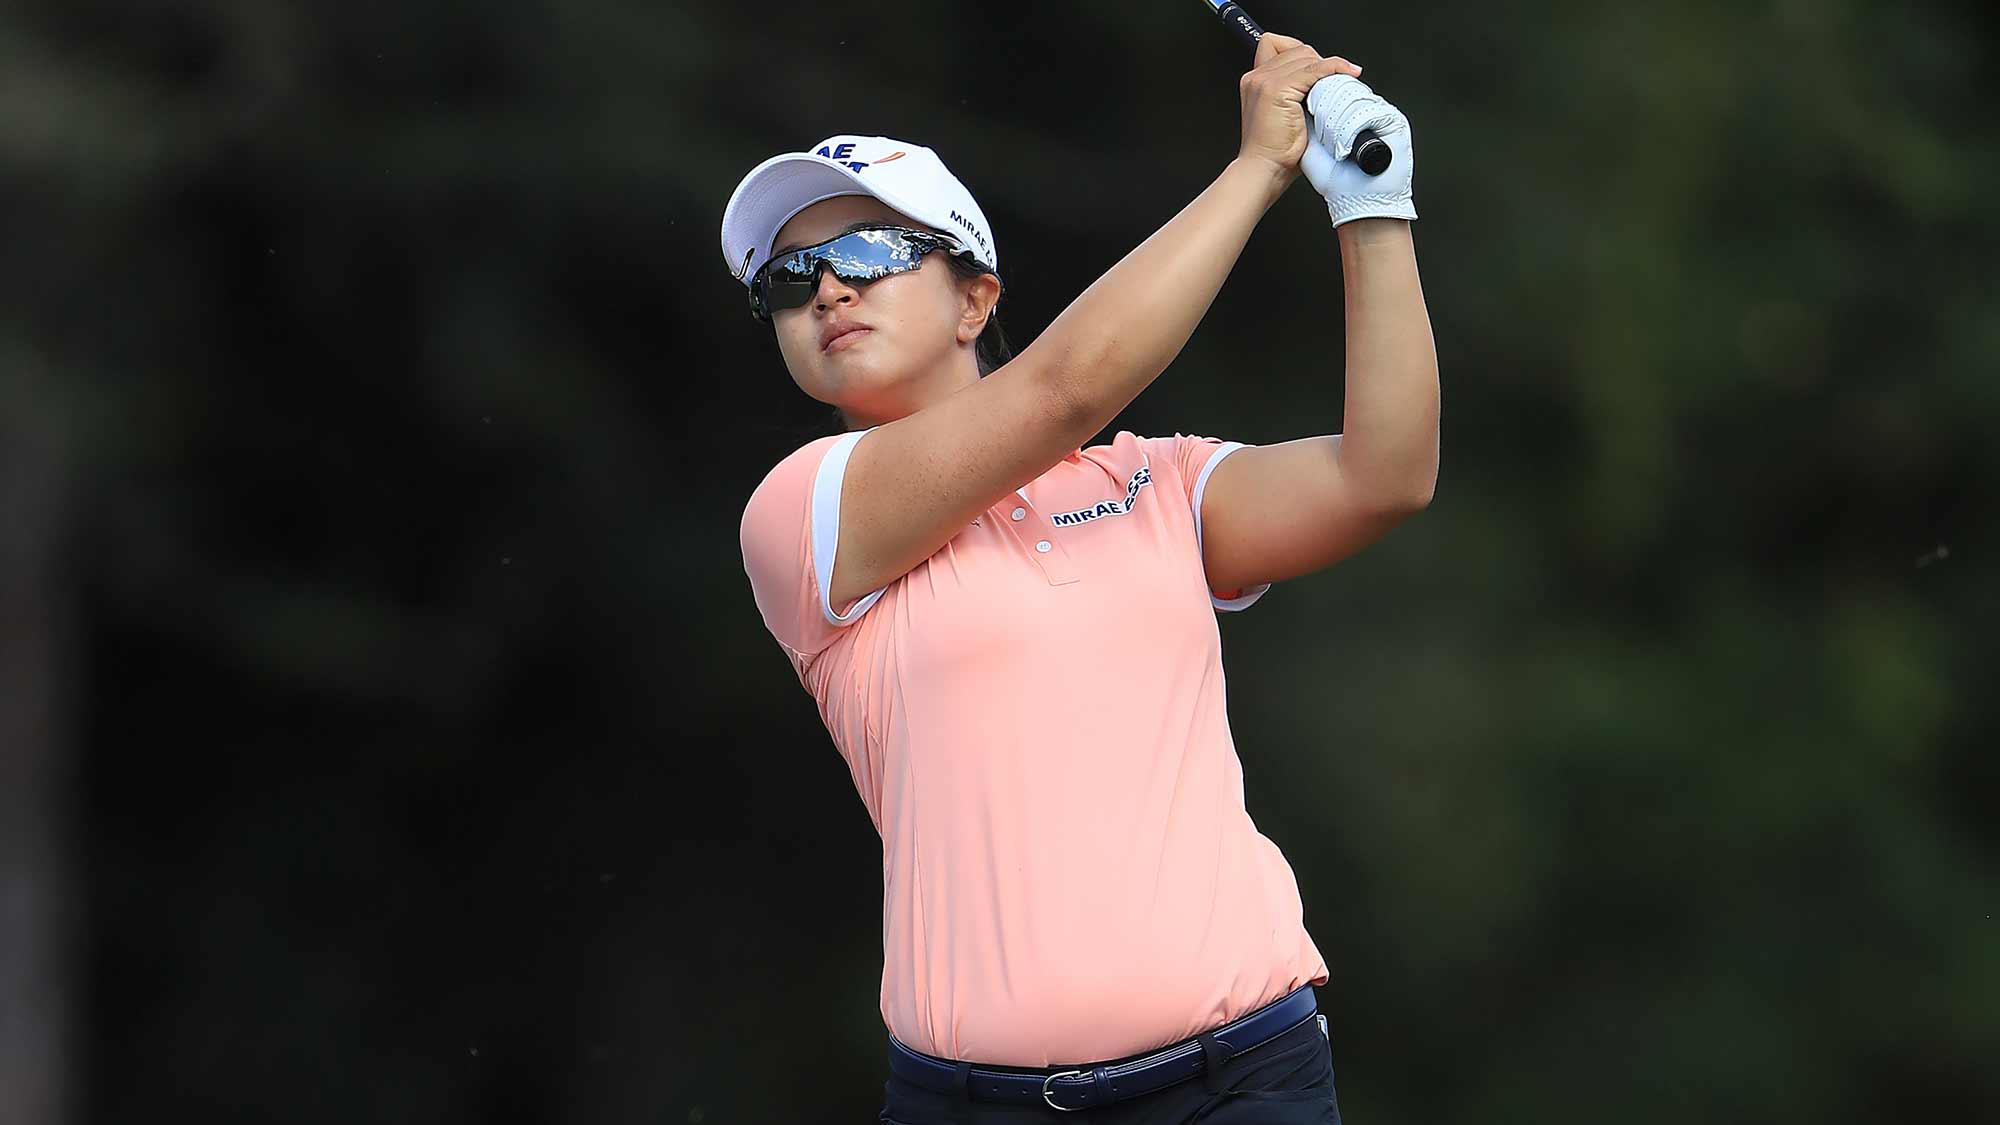 Sei Young Kim of South Korea plays a shot on the sixth hole during the second round of the CME Group Tour Championship at Tiburon Golf Club on November 22, 2019 in Naples, Florida